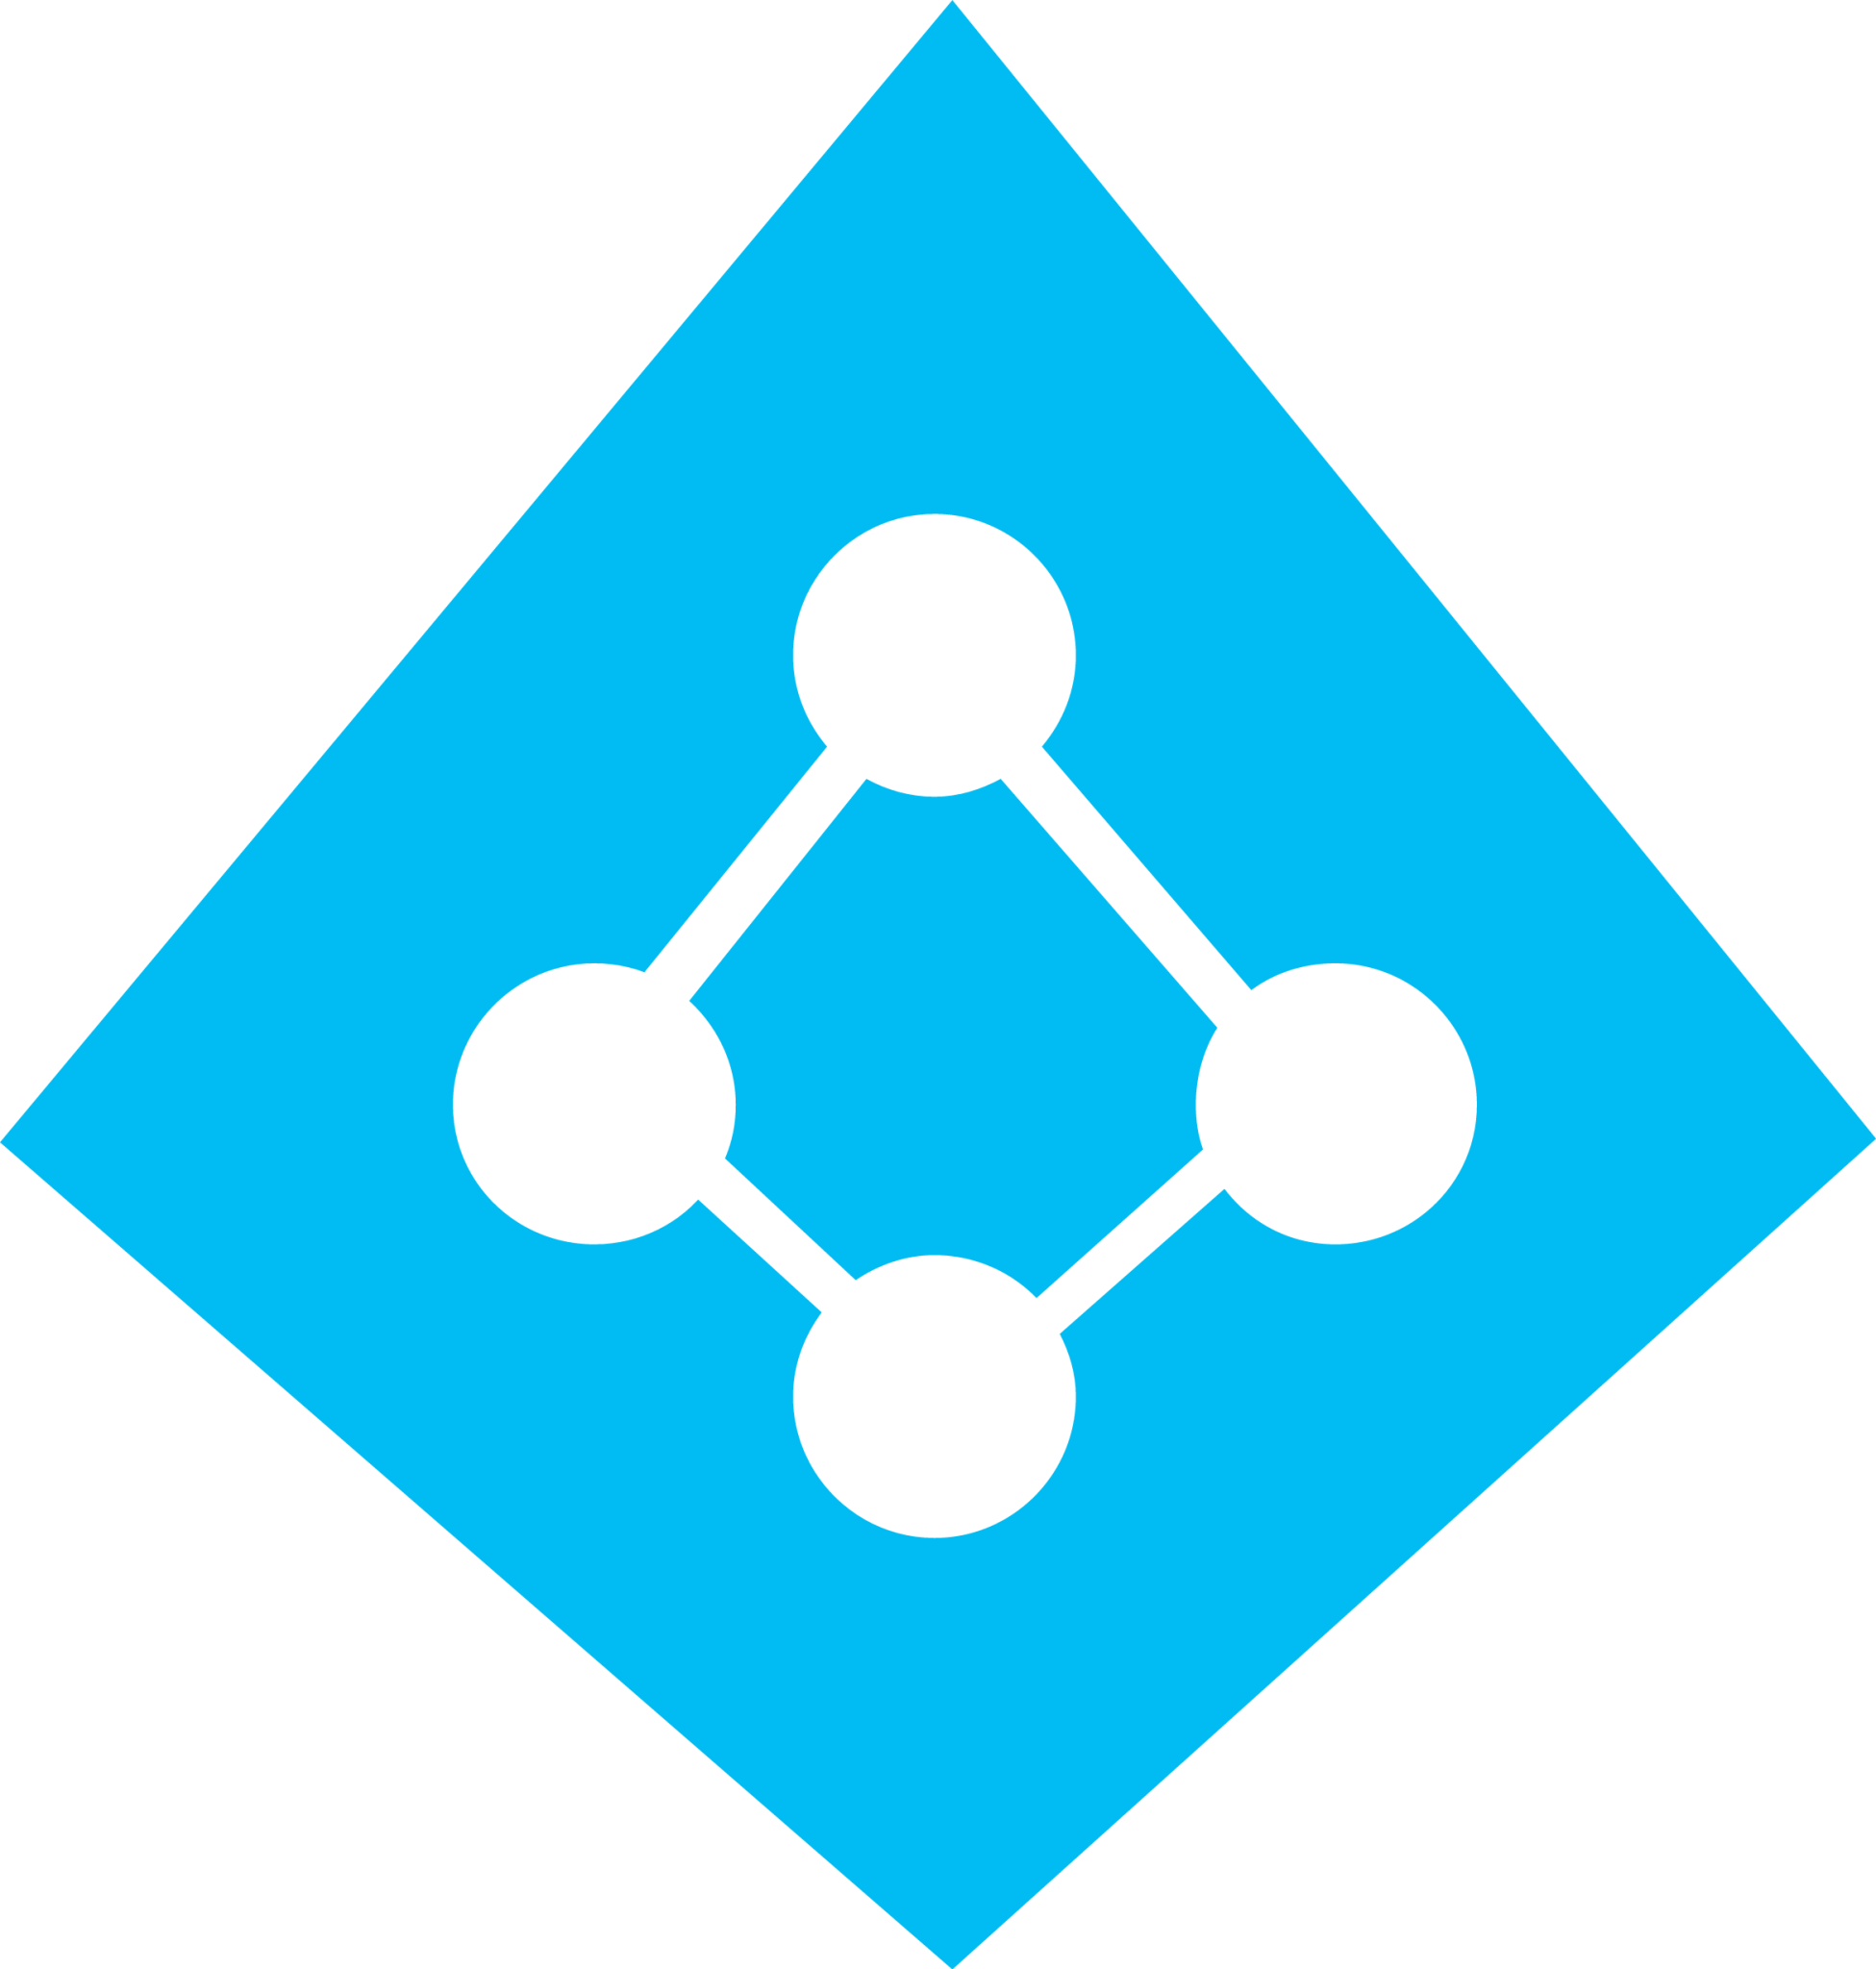 Result Images Of Azure Active Directory Logo Transparent Png Image Collection